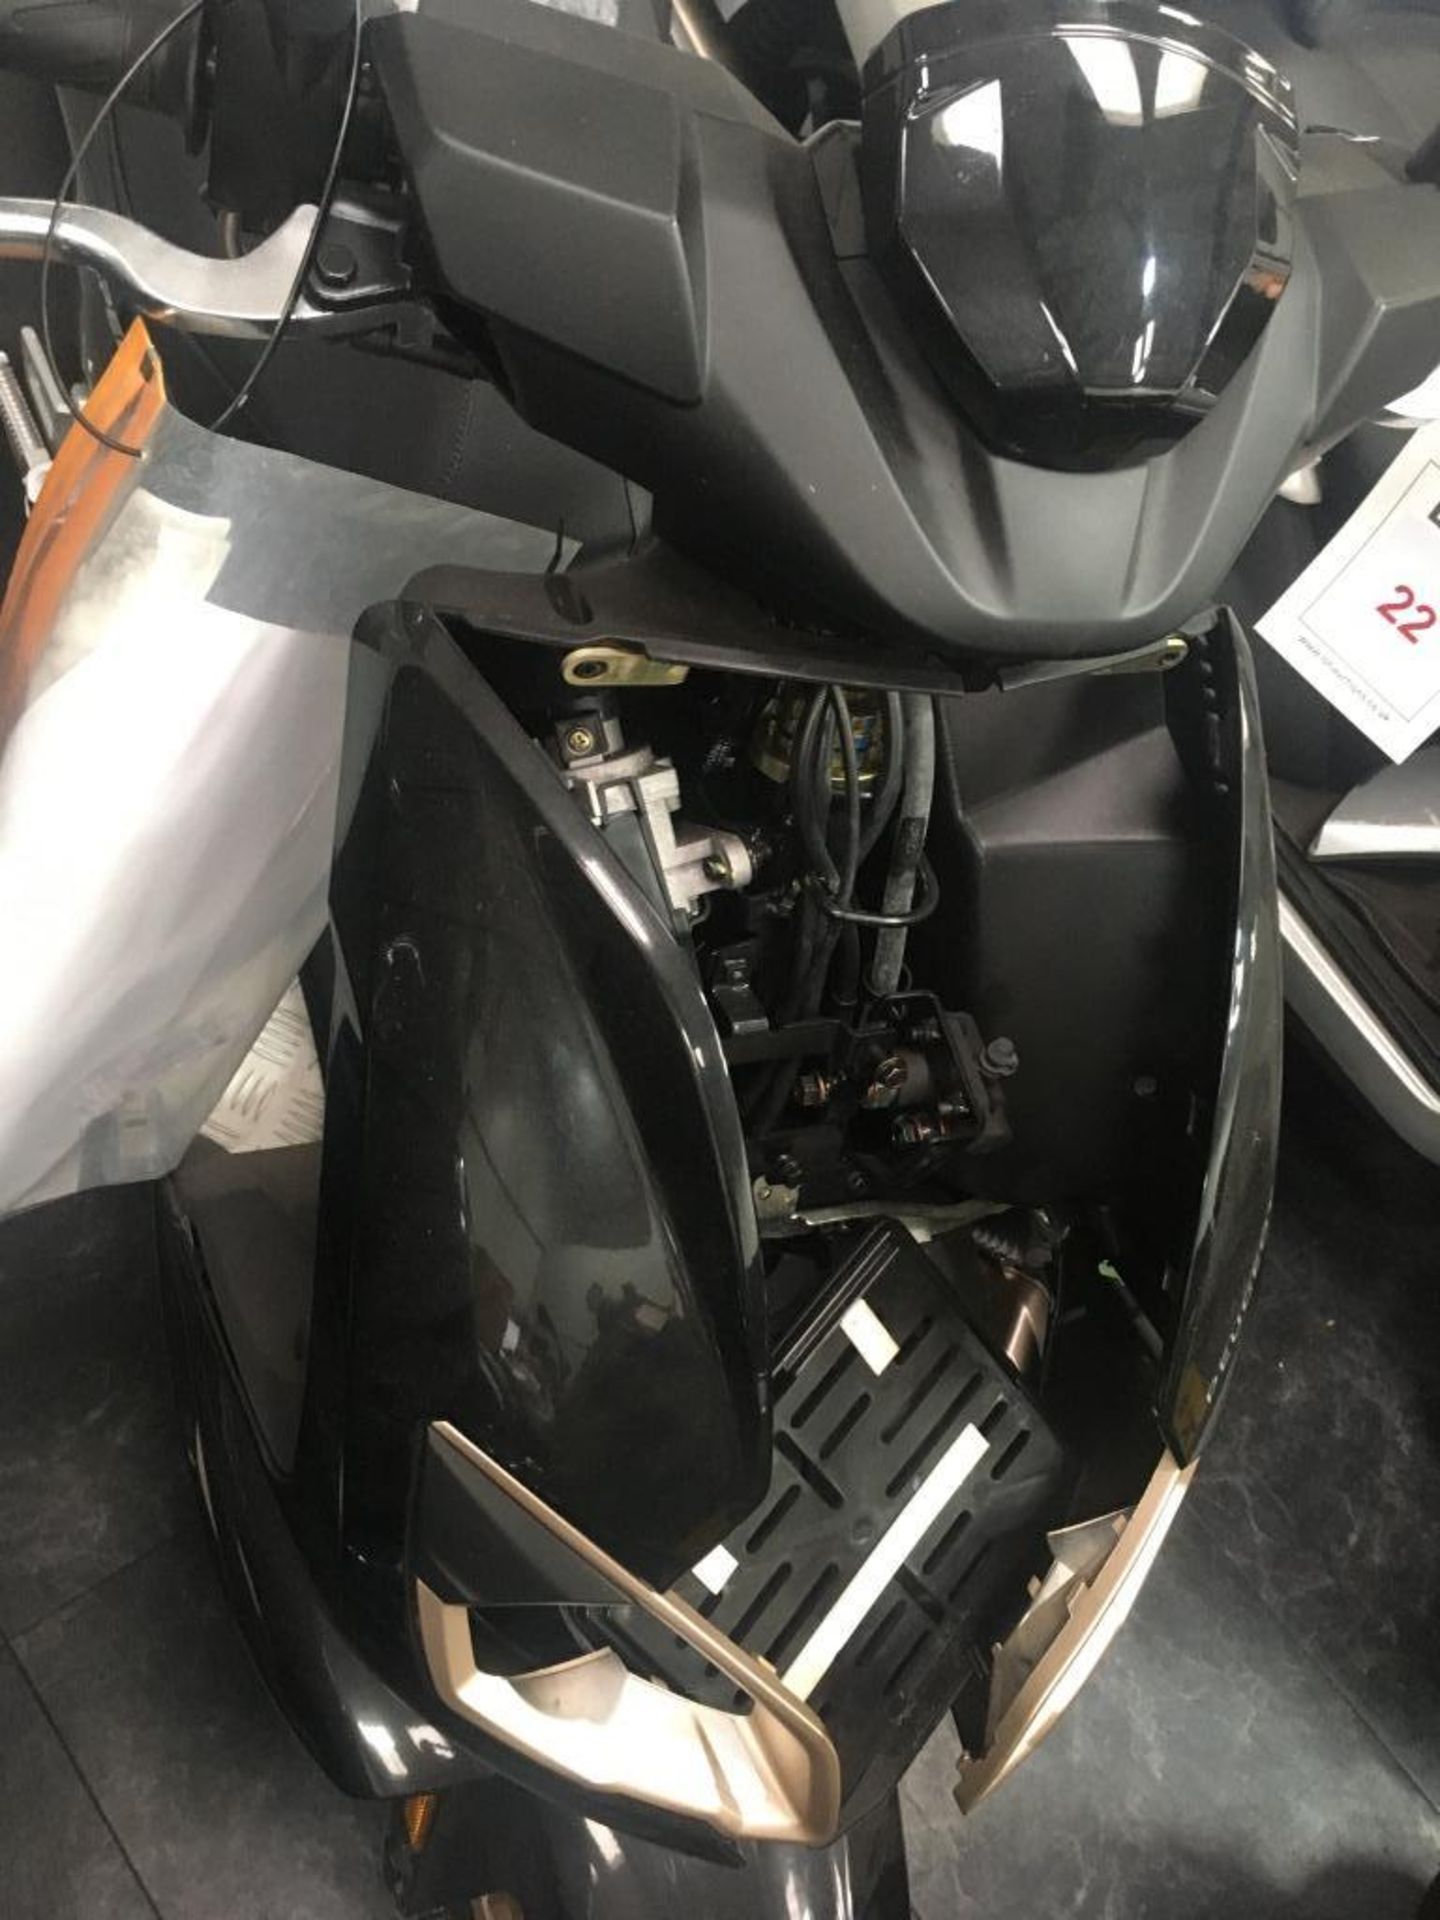 Peugeot Speedfight 4 125 LC moped VIN: VGAF2AGJAGJ000019 (spares or repair, cannot be registered) - Image 3 of 5